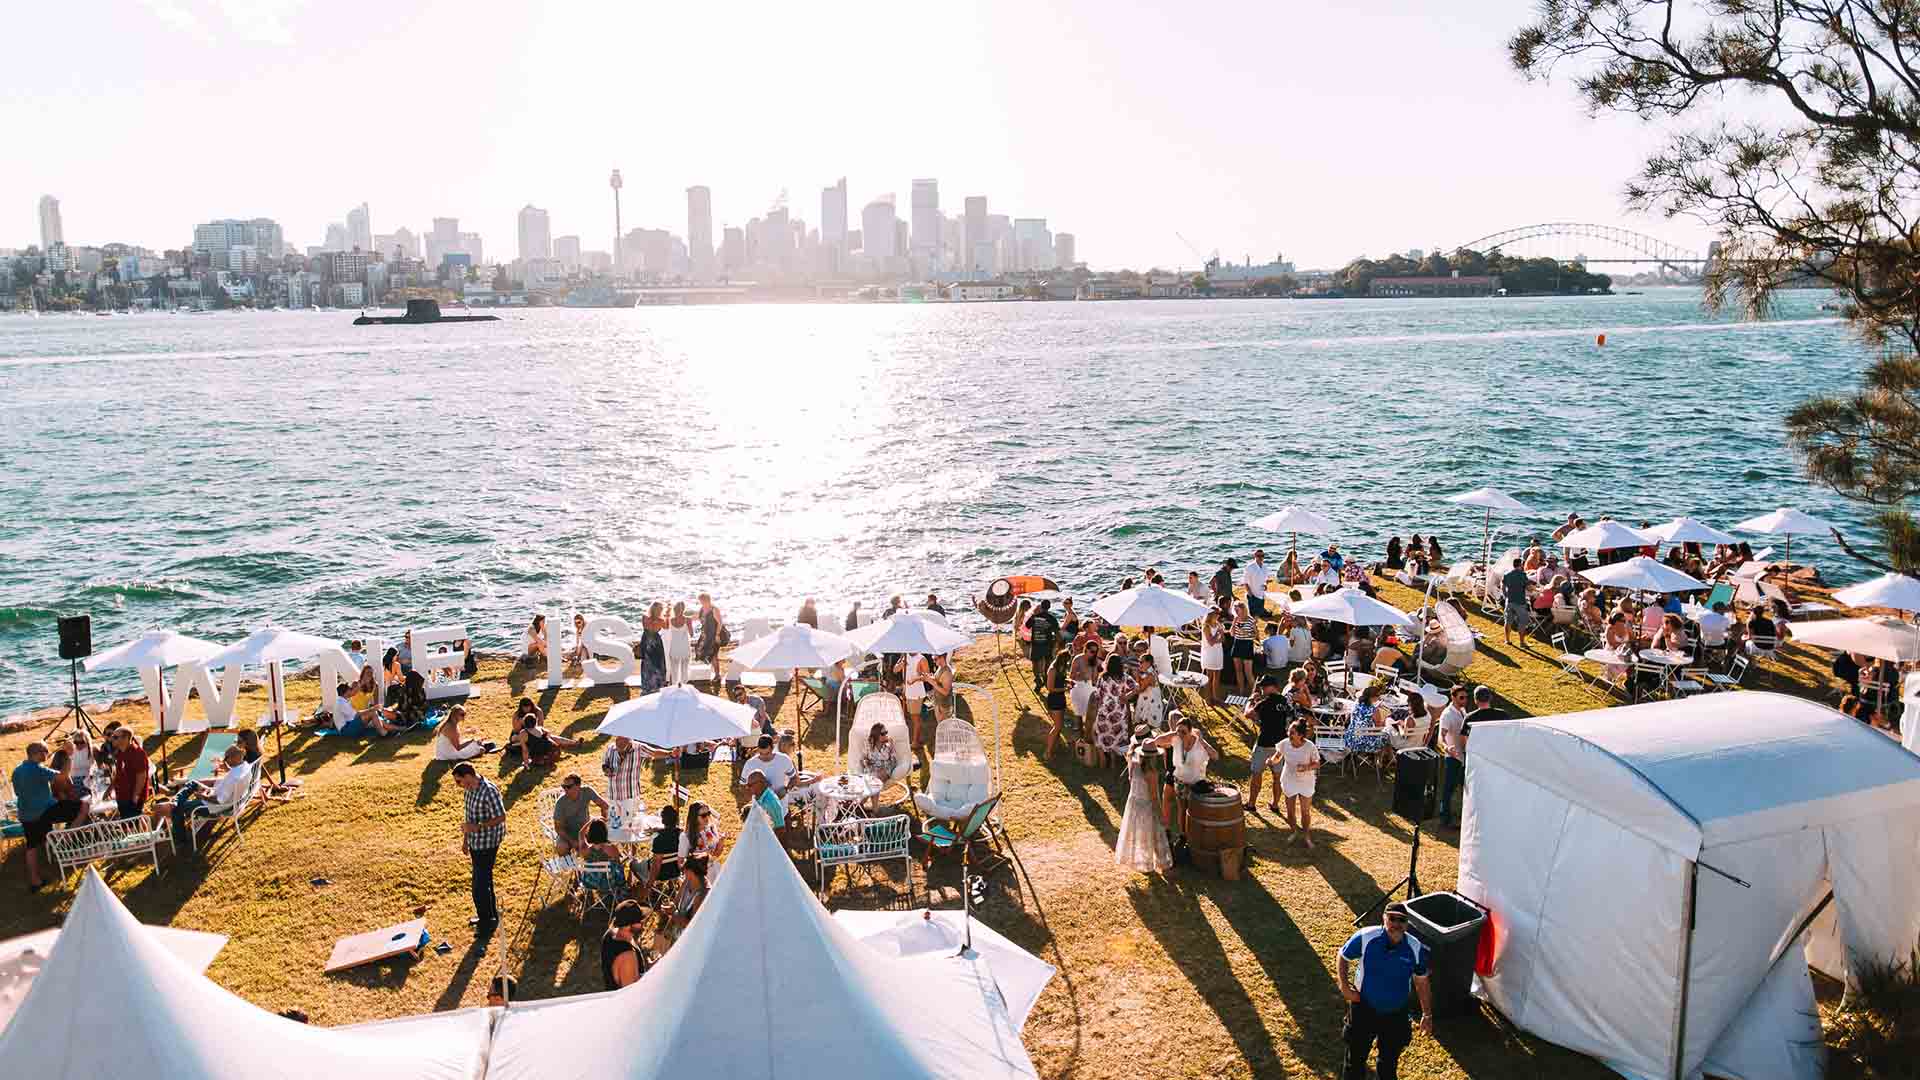 Wine Island Is Bringing Its Three-Day Vino-Tasting Party Back to Sydney Harbour in 2022